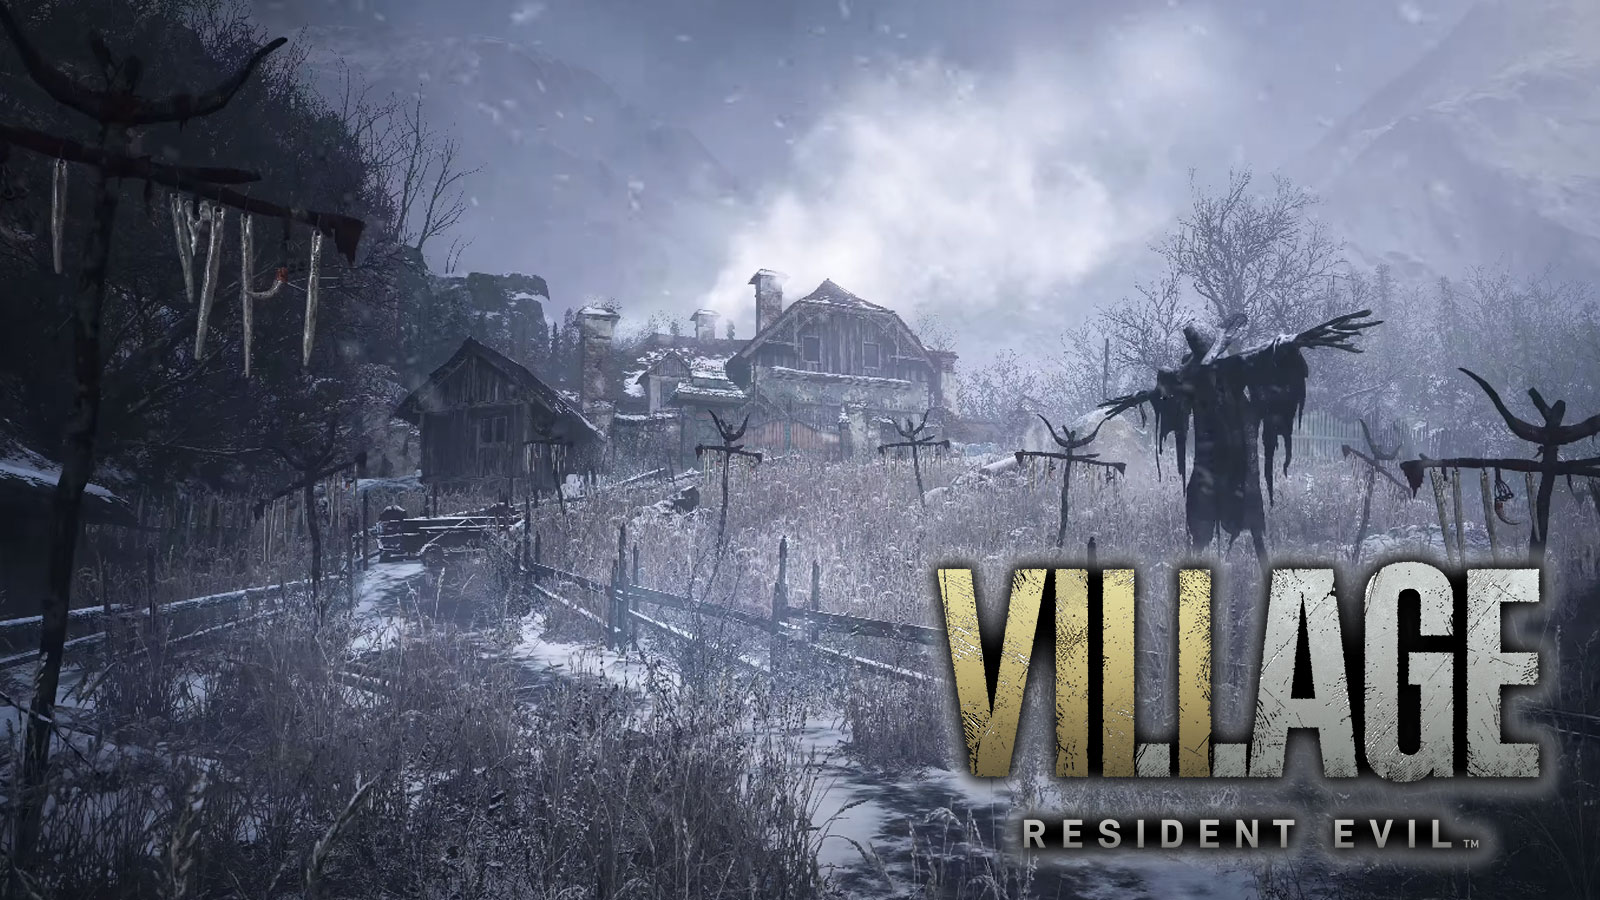 Resident evil village steam is currently in offline фото 67